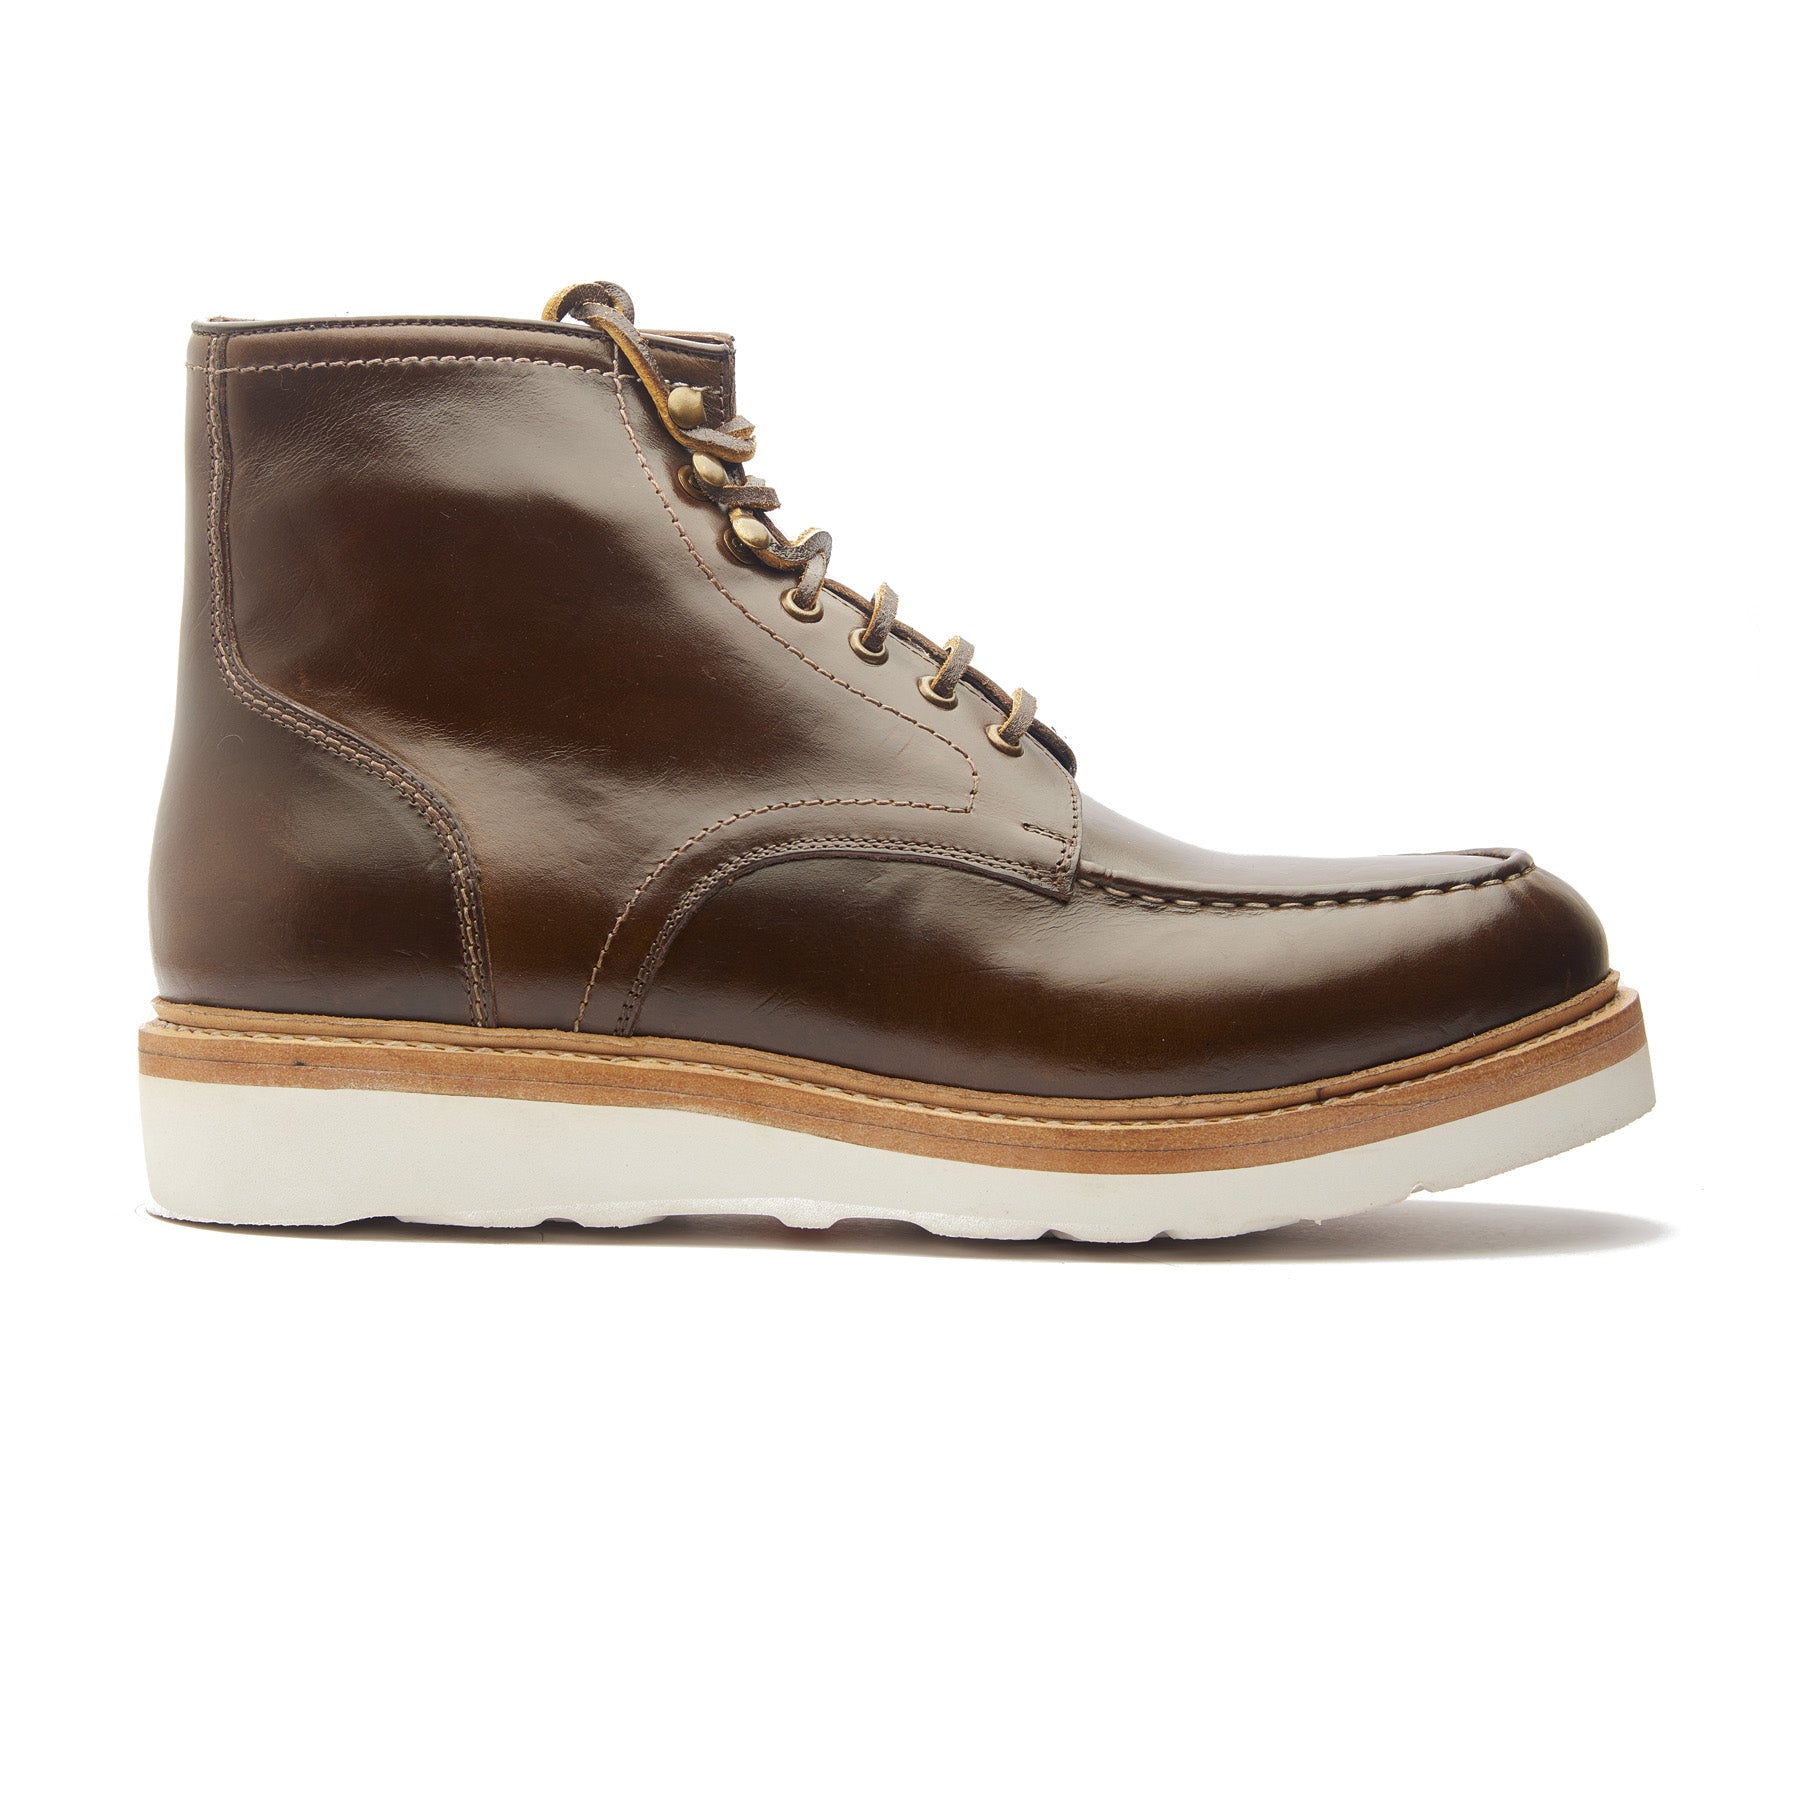 Dallas, Moctoe Boot - Olive Brown Chromexcel | Boots 2.0 – BLKBRD ...